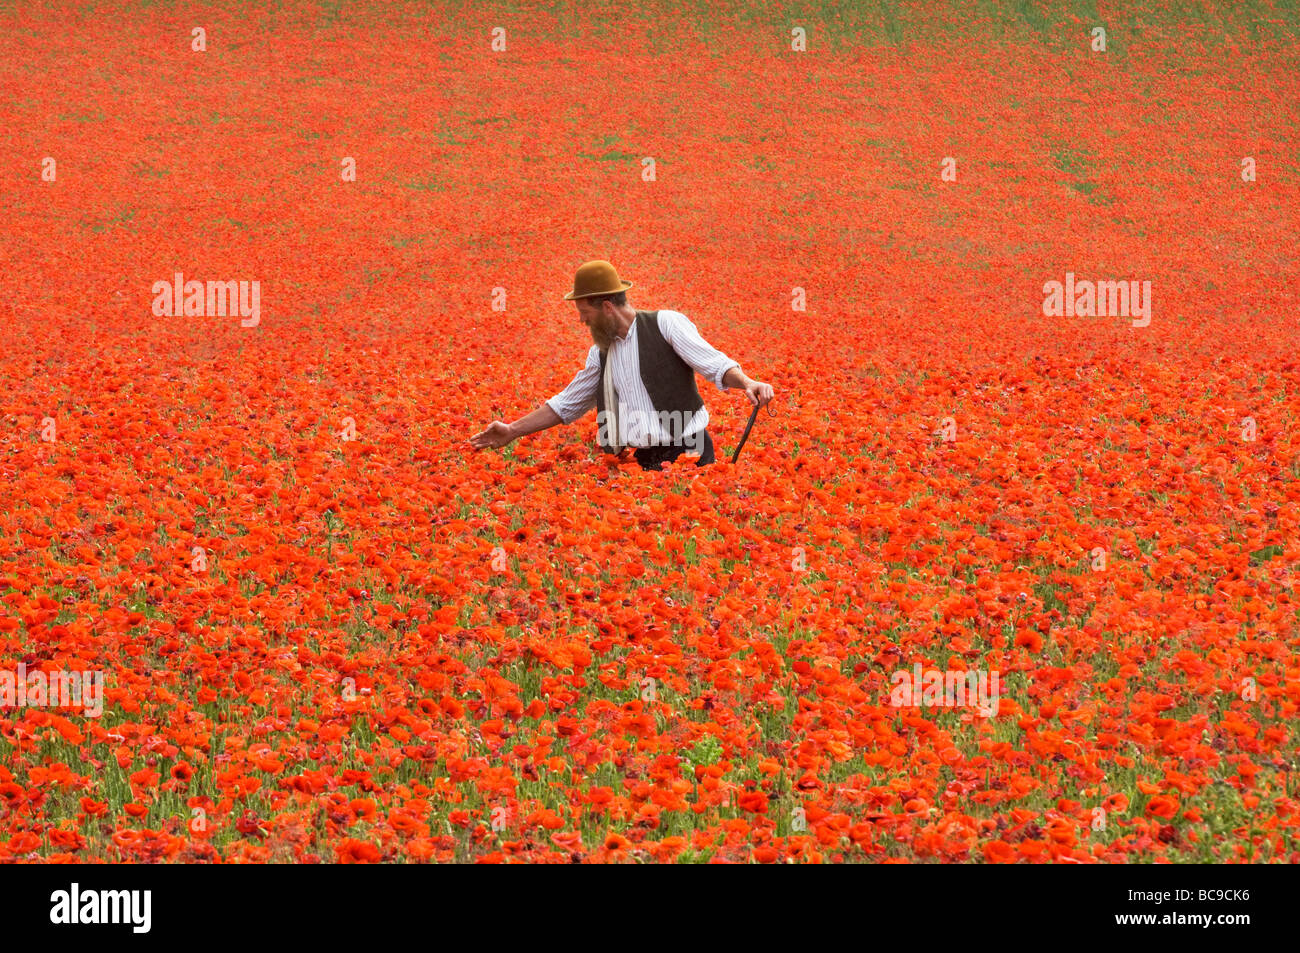 A  farmer in a field of poppies on the South Downs in Sussex England. The flowers are a blaze of scarlet on a hot June day. Stock Photo